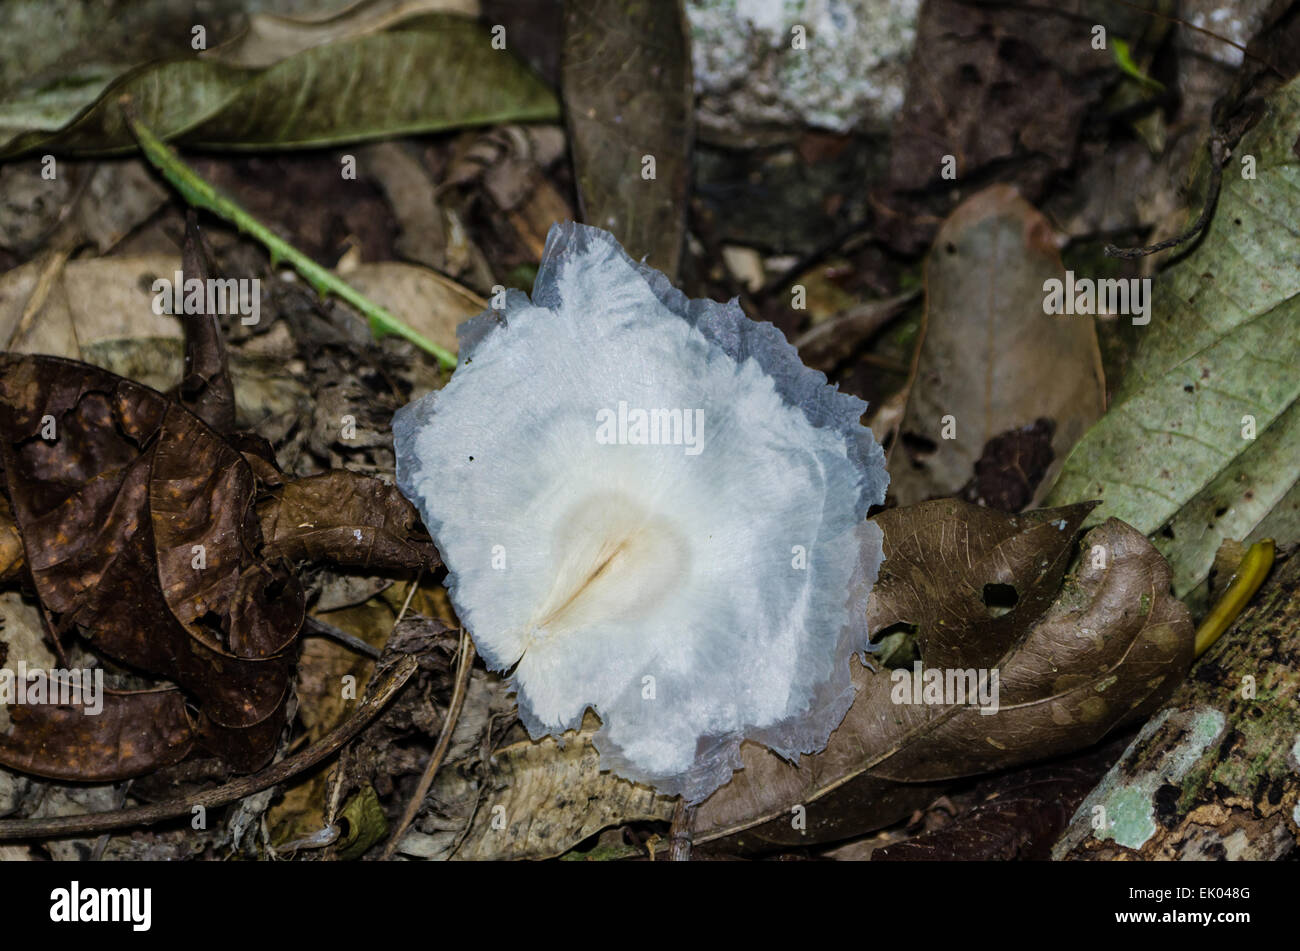 A Plant seed in a shape of whit flake. Panama, Central America. Stock Photo